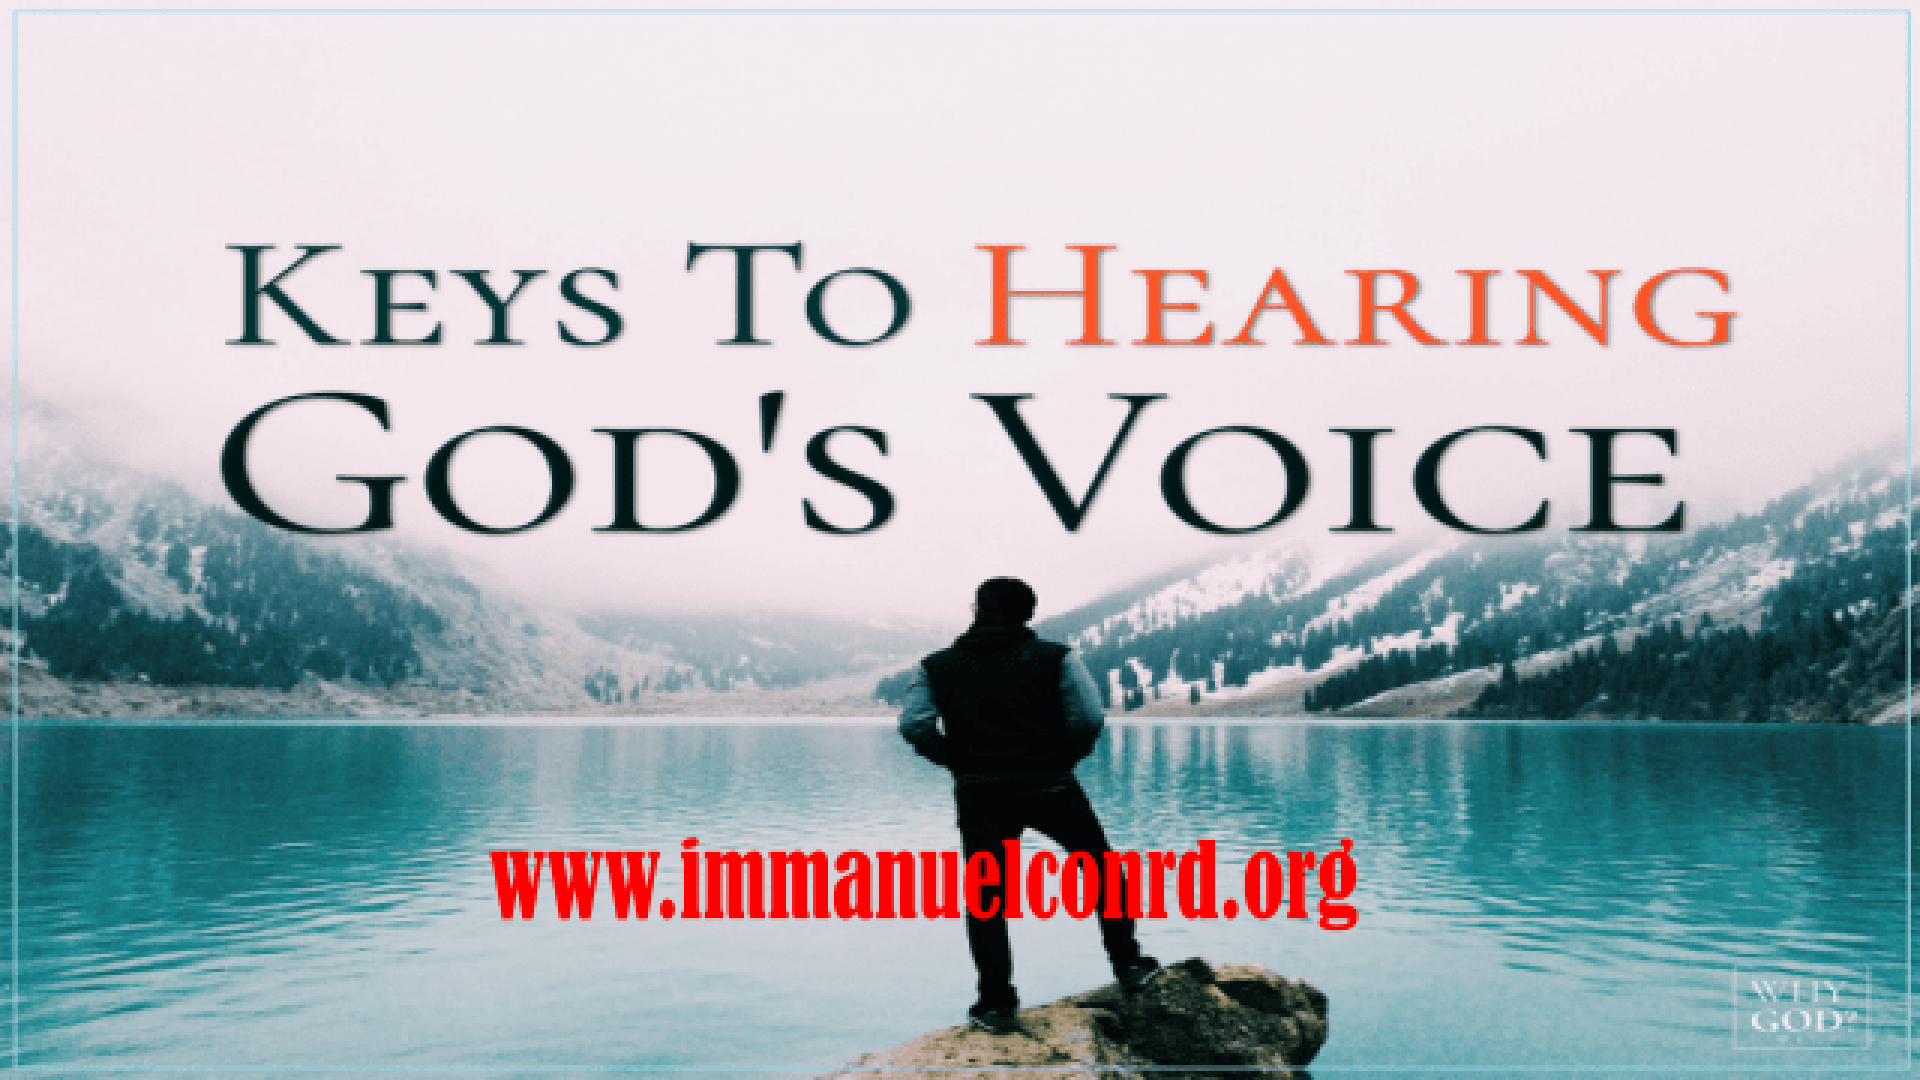 HOW TO HEAR THE VOICE OF GOD